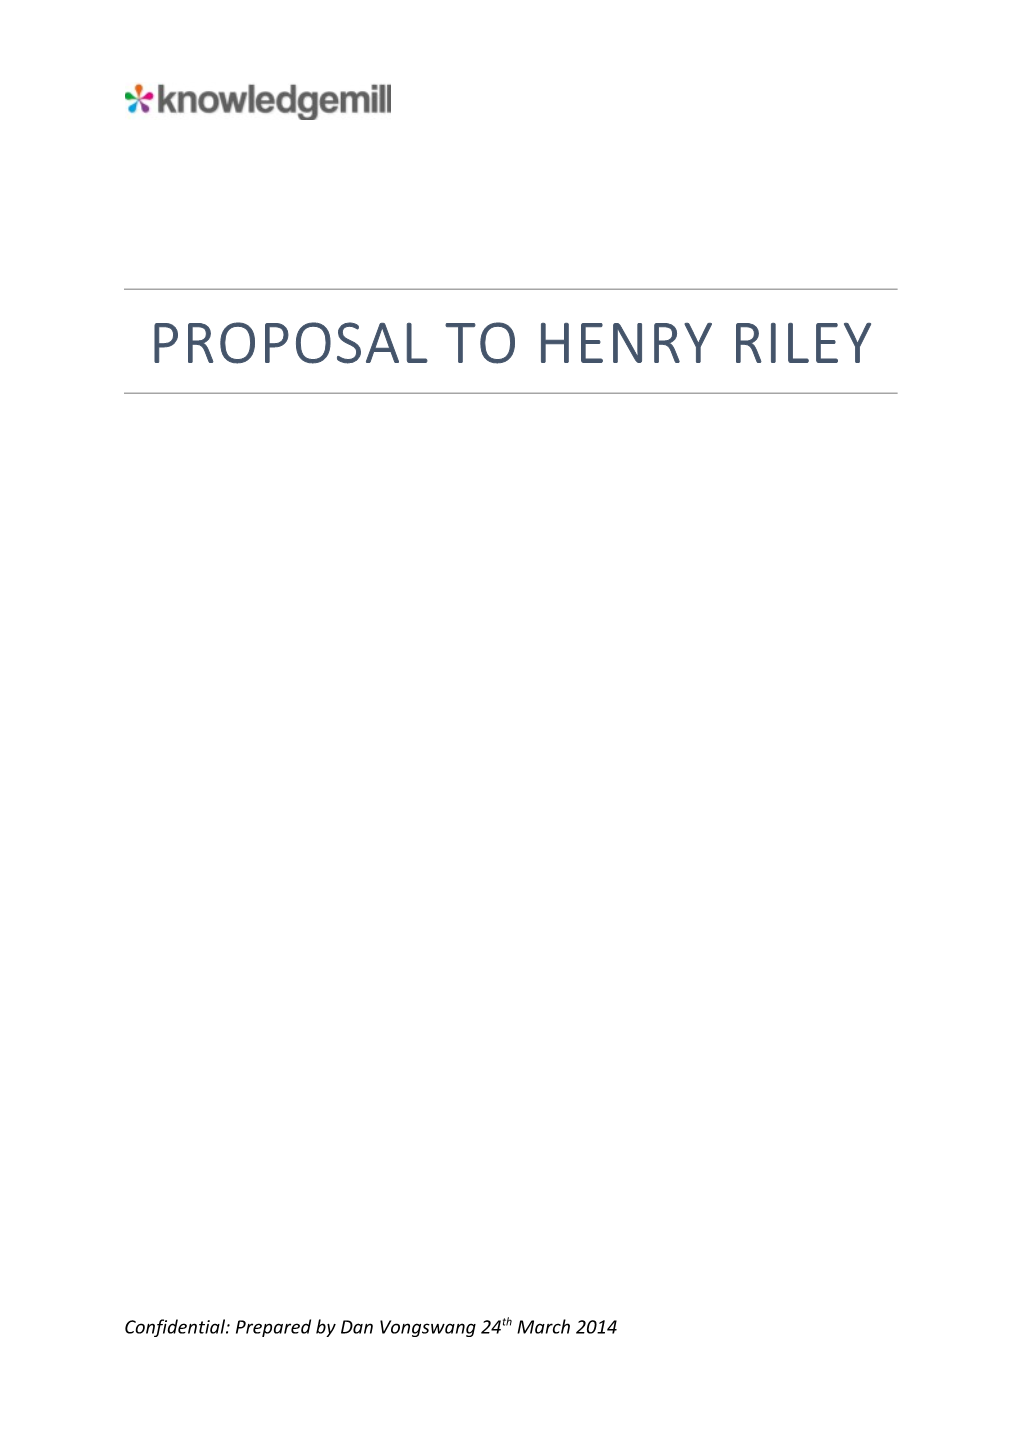 Proposal to Henry Riley